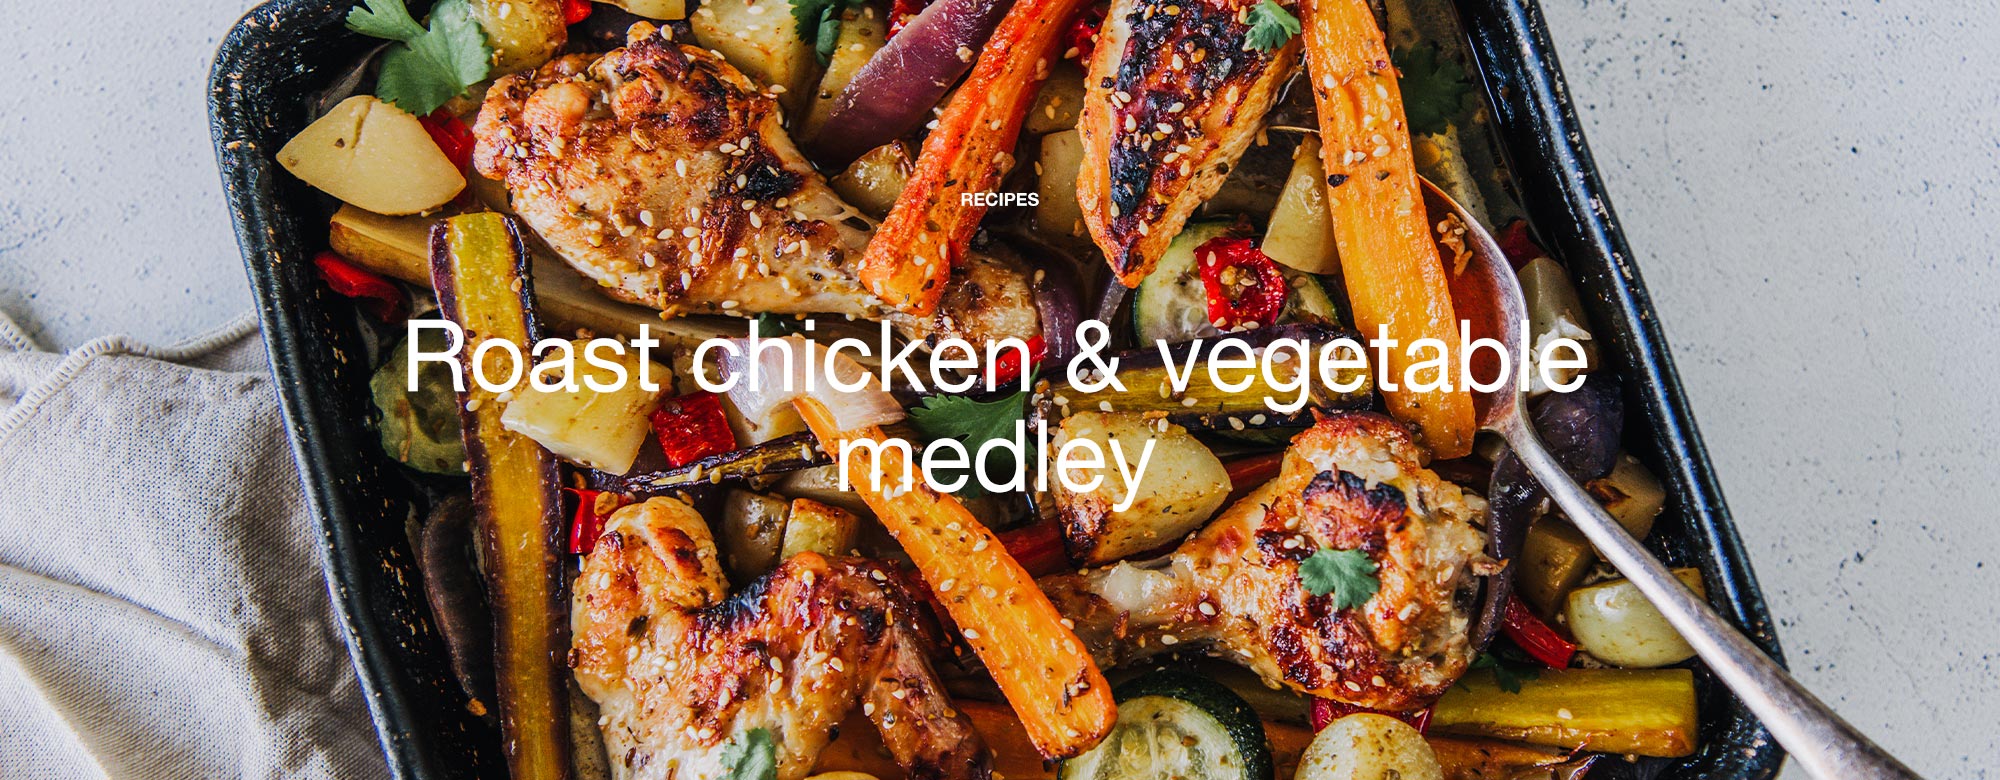 Roast chicken and vegetable medley